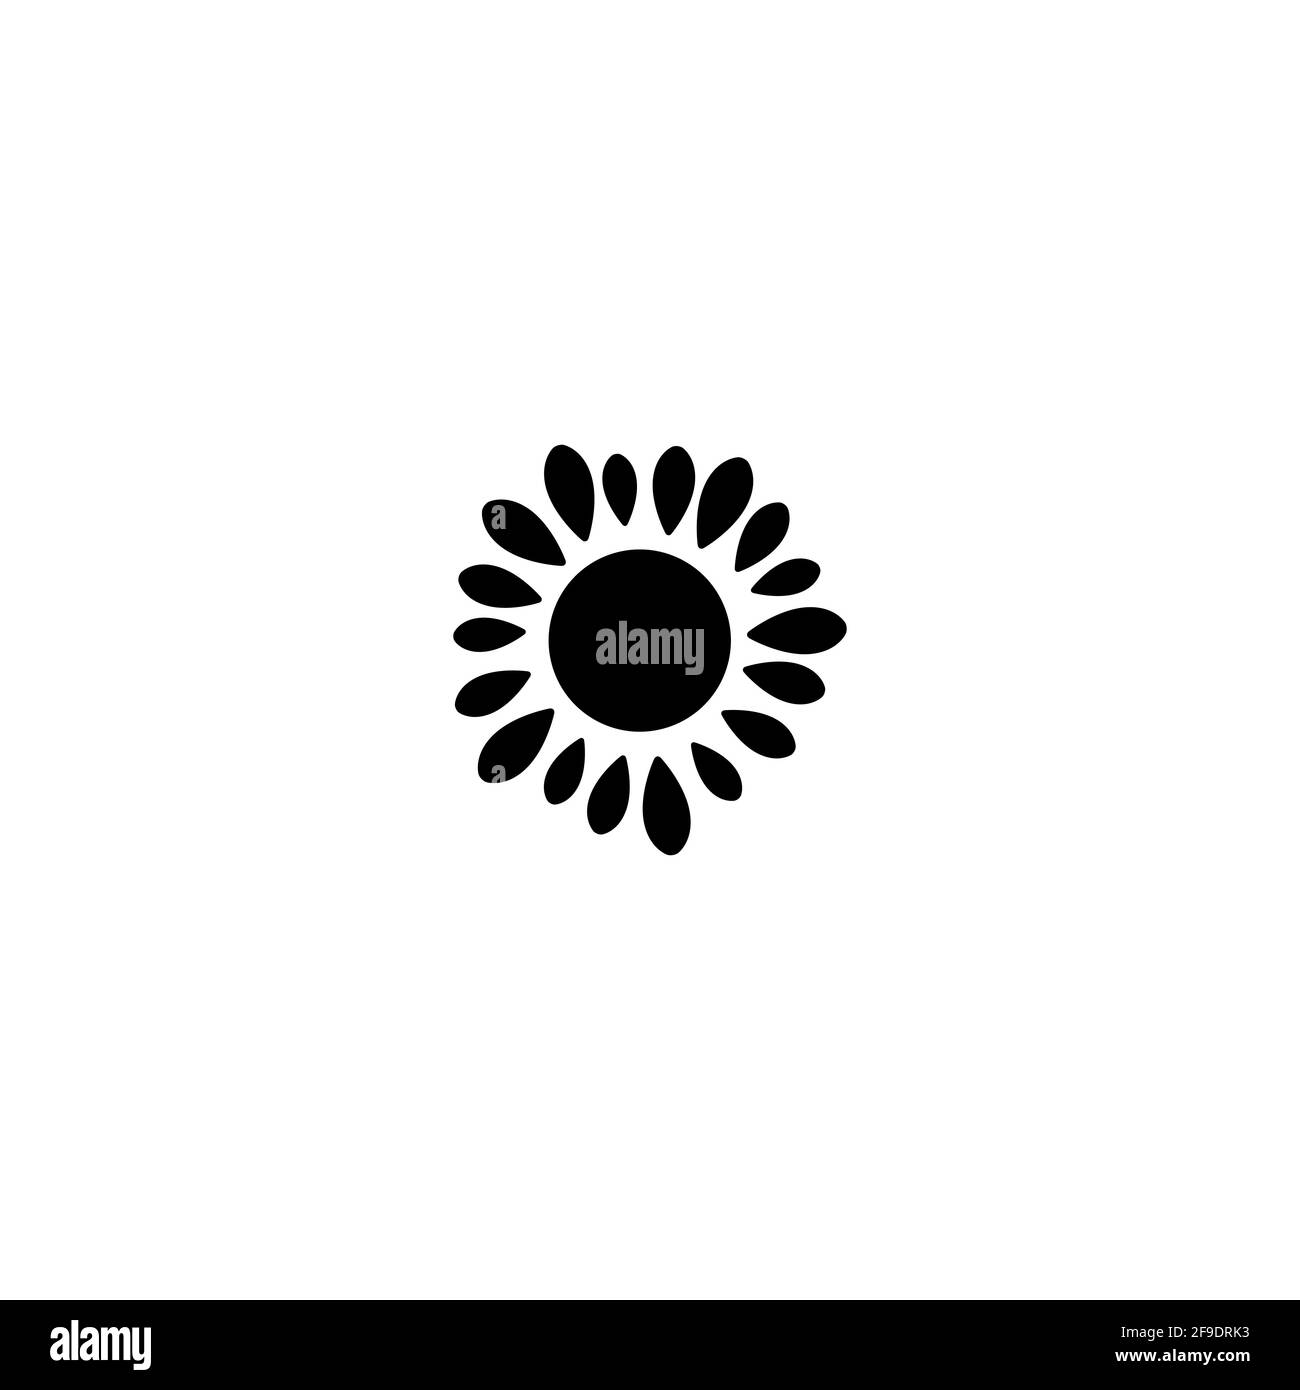 Black flat icon of sunflower. Bloom with big sharp petals and round core. Isolated on white. Vector illustration. Eco style. Nature flower symbol. Stock Vector